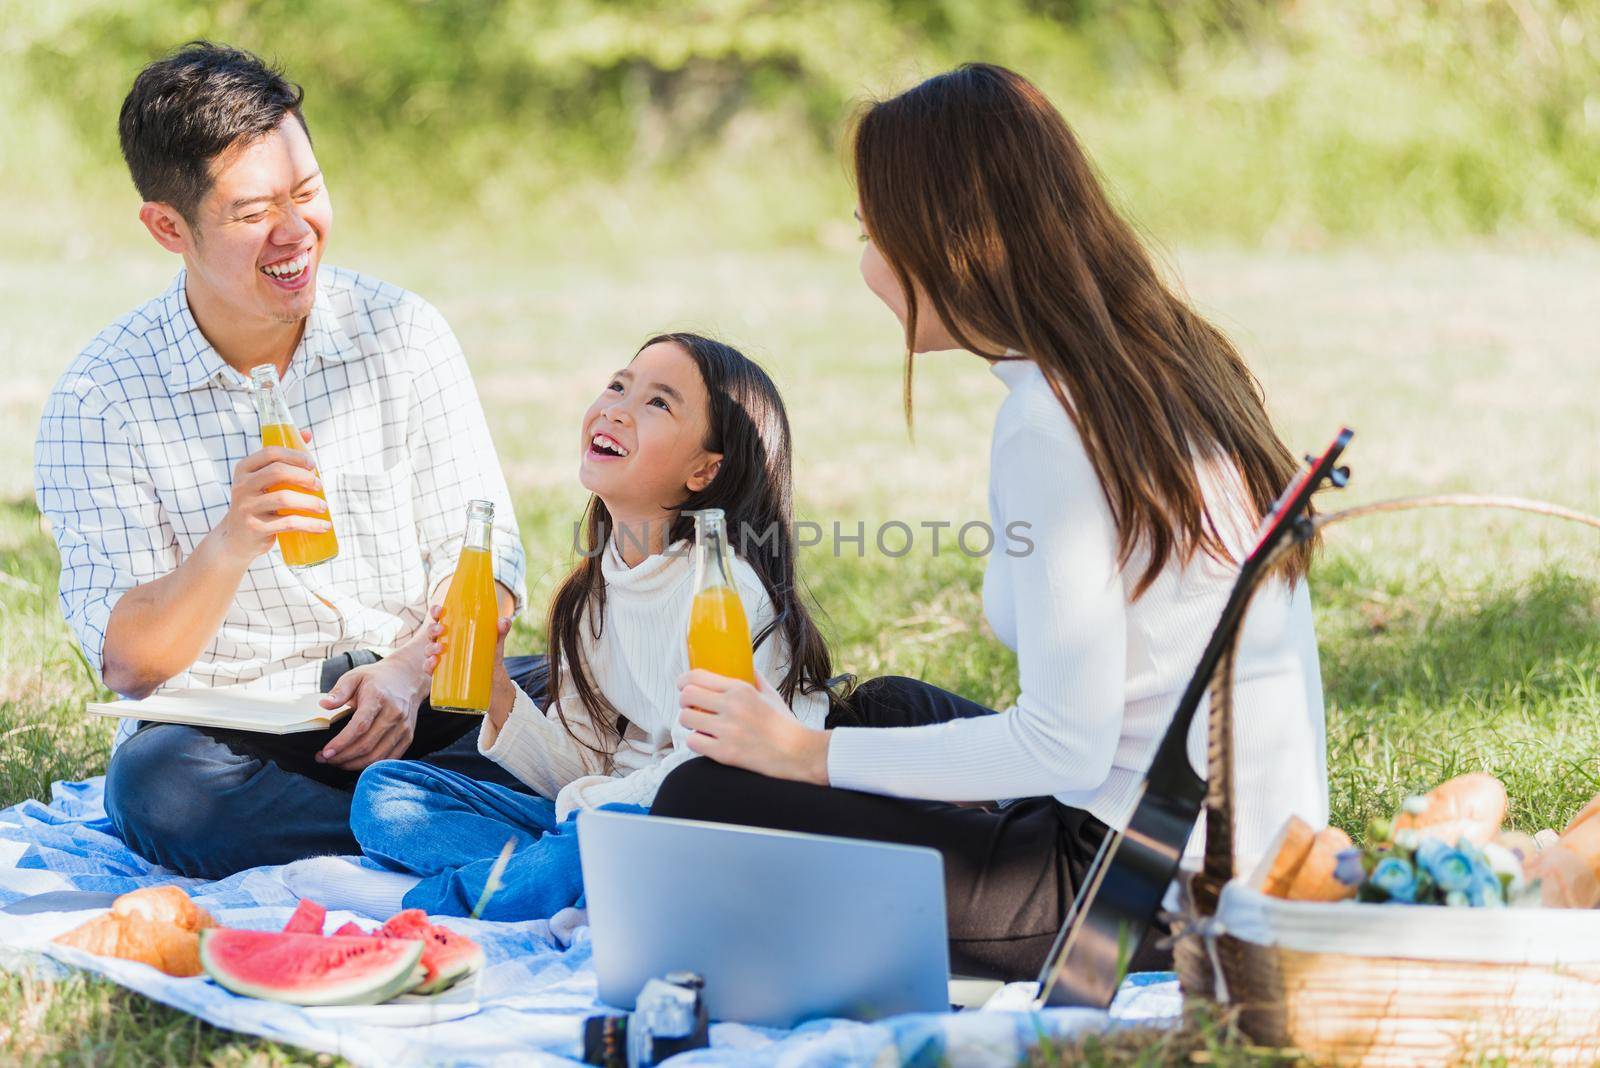 Happy Asian young family father, mother and child little girl having fun and enjoying outdoor sitting on picnic blanket drinking orange juice from glass bottle, Summer resting at a nature garden park